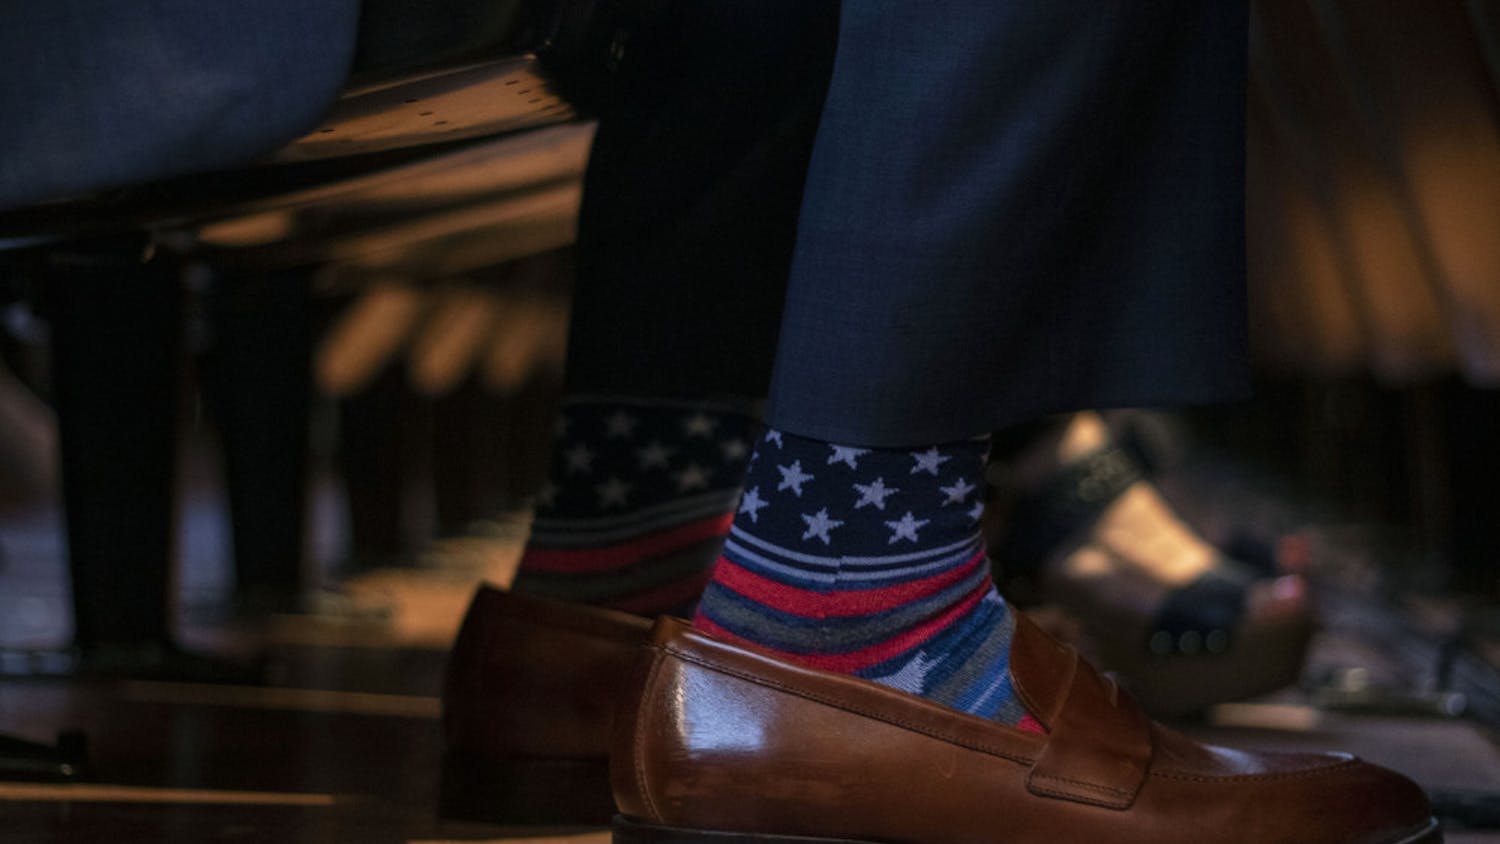 Senator Keith Perry wears socks with stars and stripes Thursday while waiting for Donald Trump Jr. to speak.